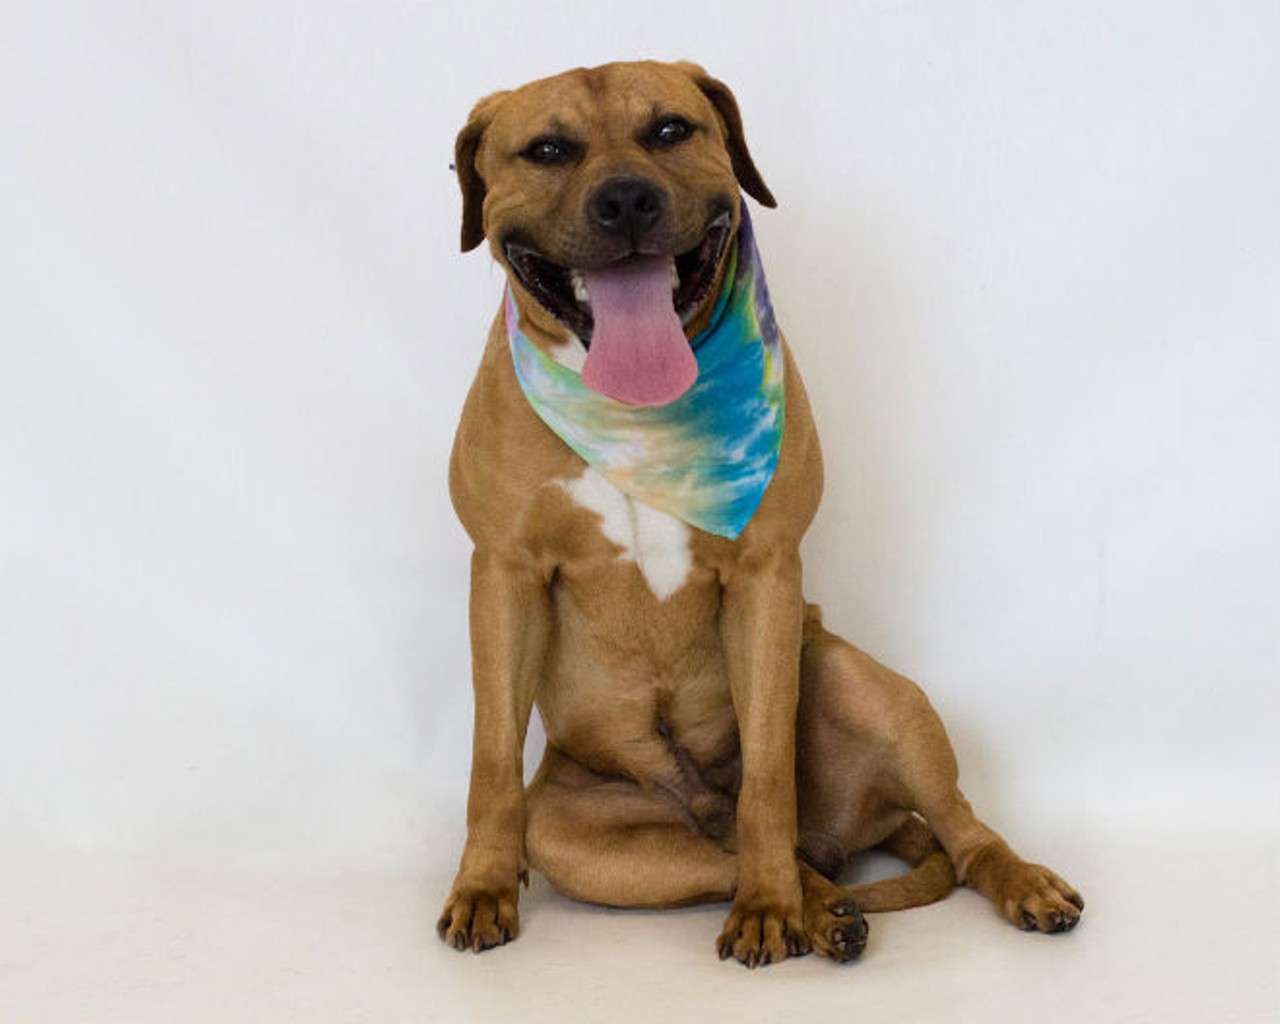 40 sweet photos of adoptable dogs at Orange County Animal Services